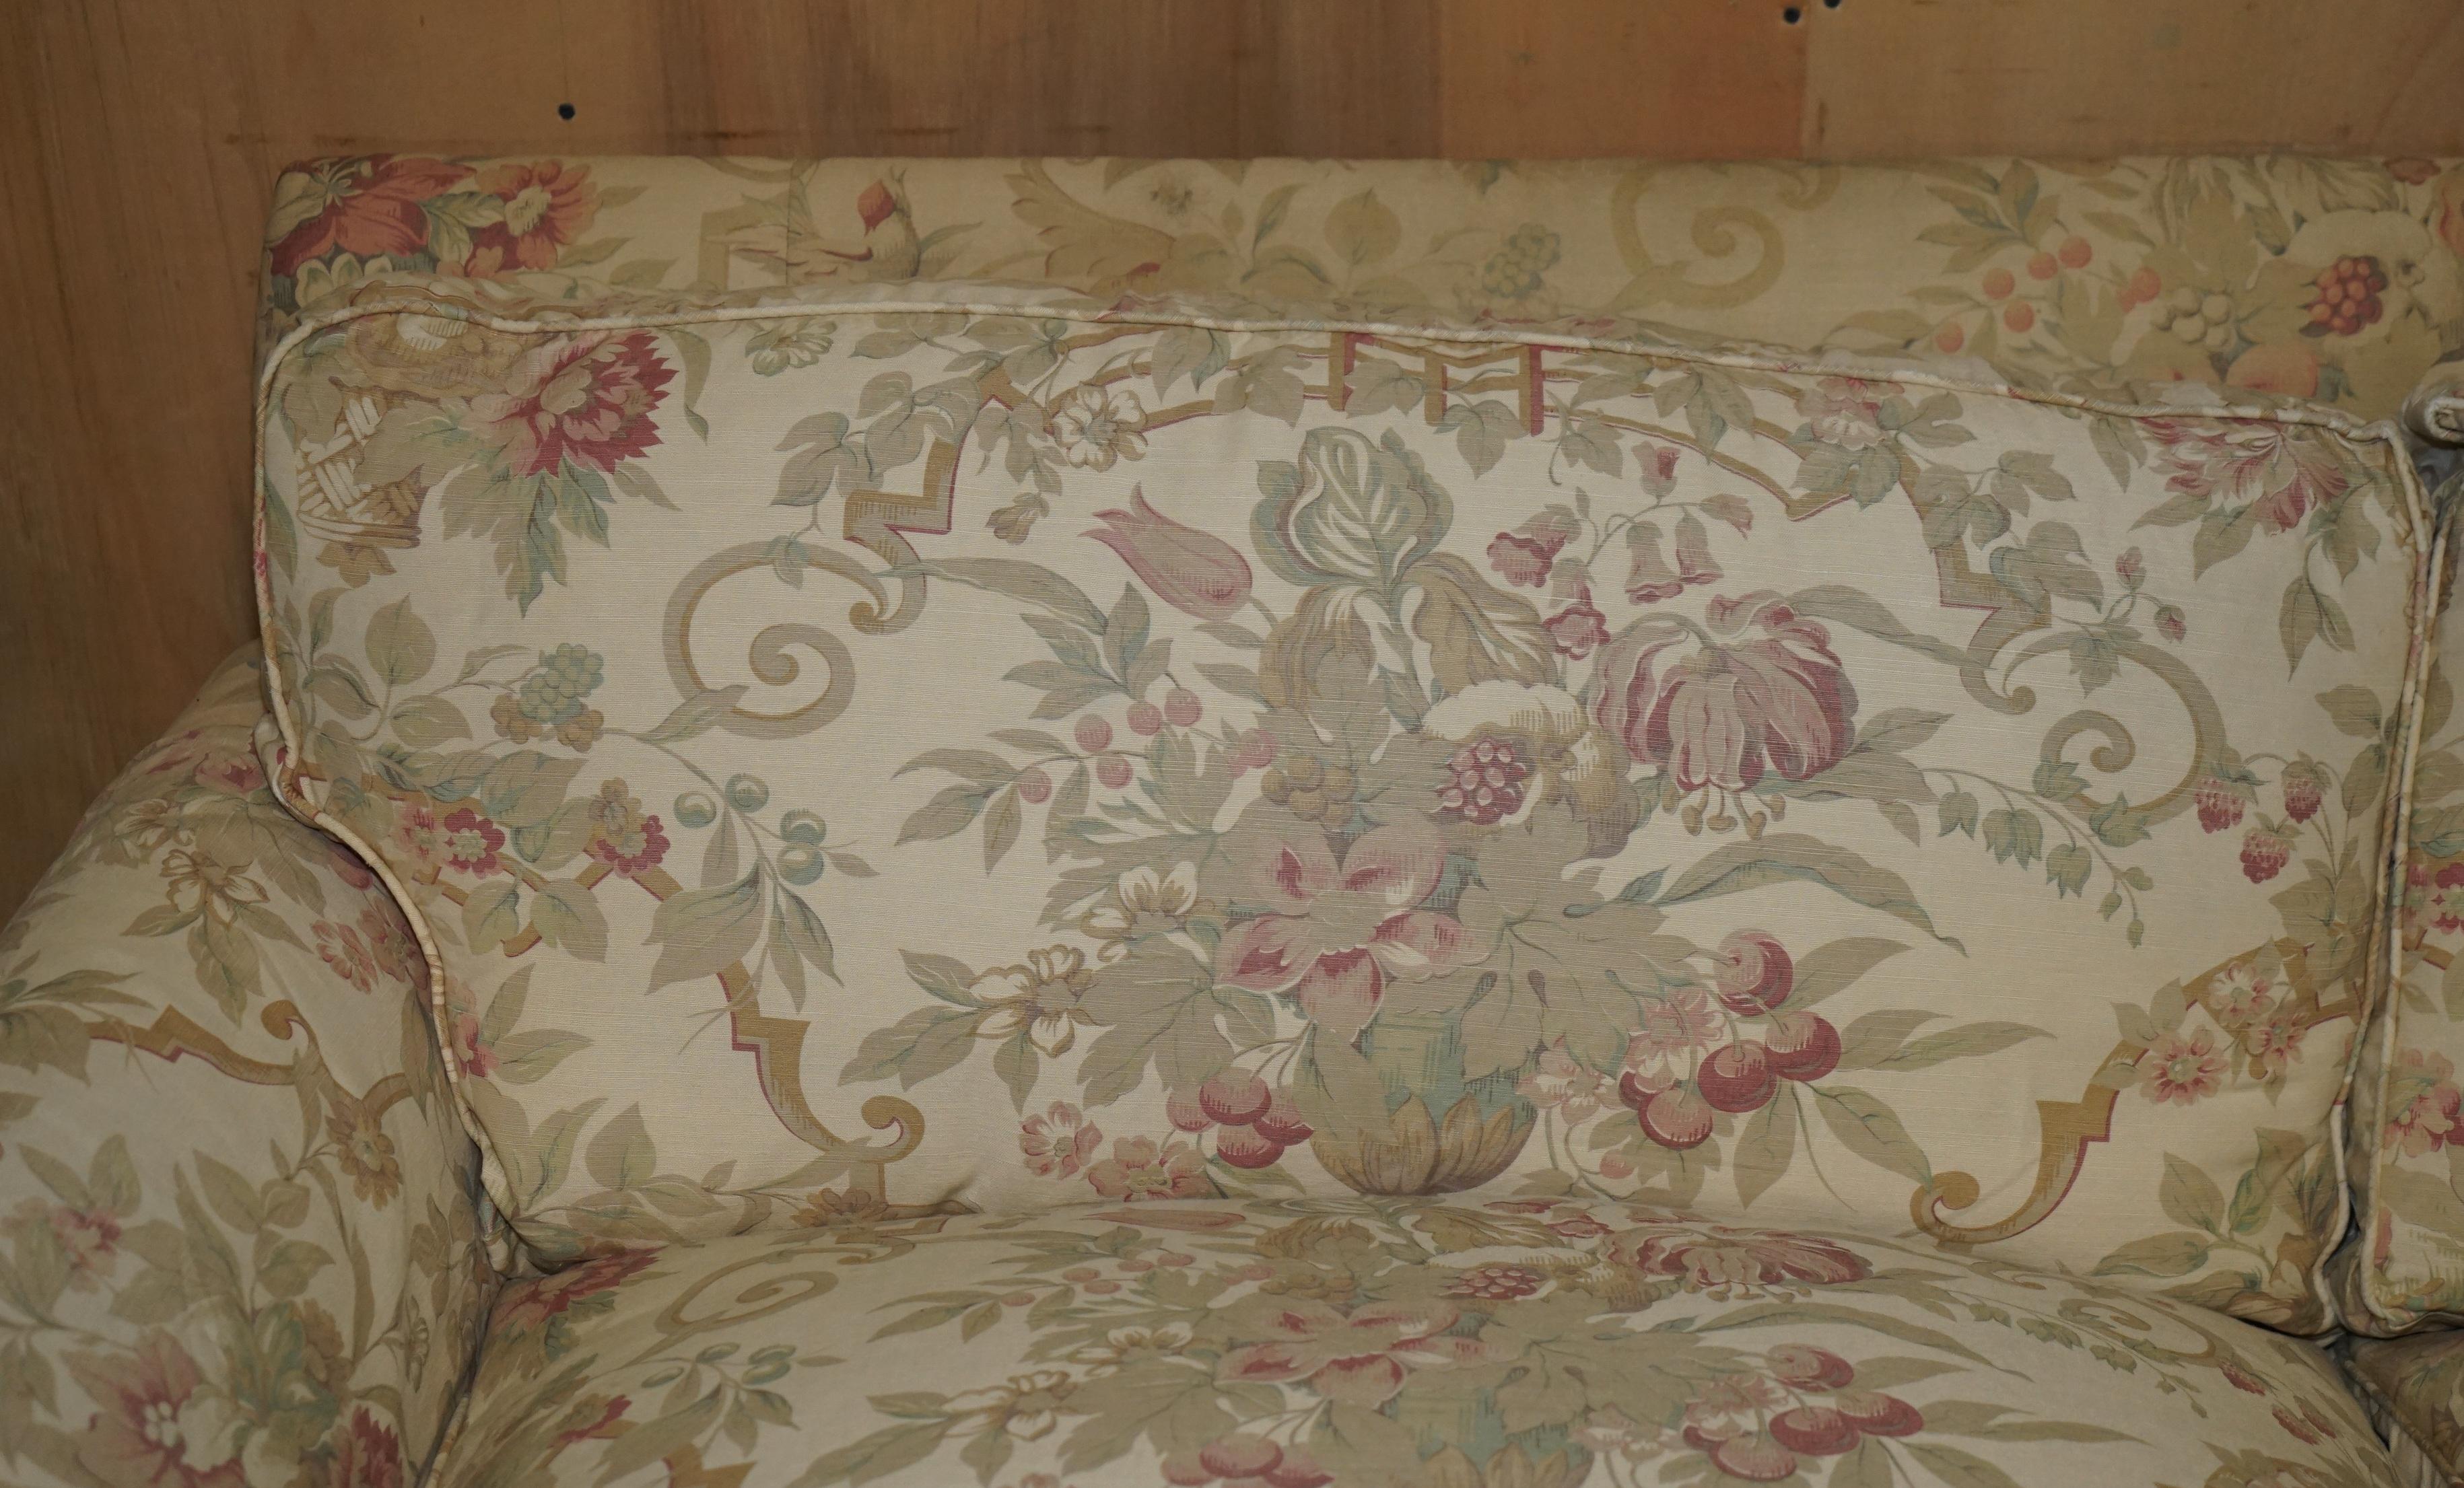 Upholstery GEORGE SMITH CHELSEA 3 SEAT SOFA IN ORIGINAL UPHOLSTERY PART SUiTE For Sale